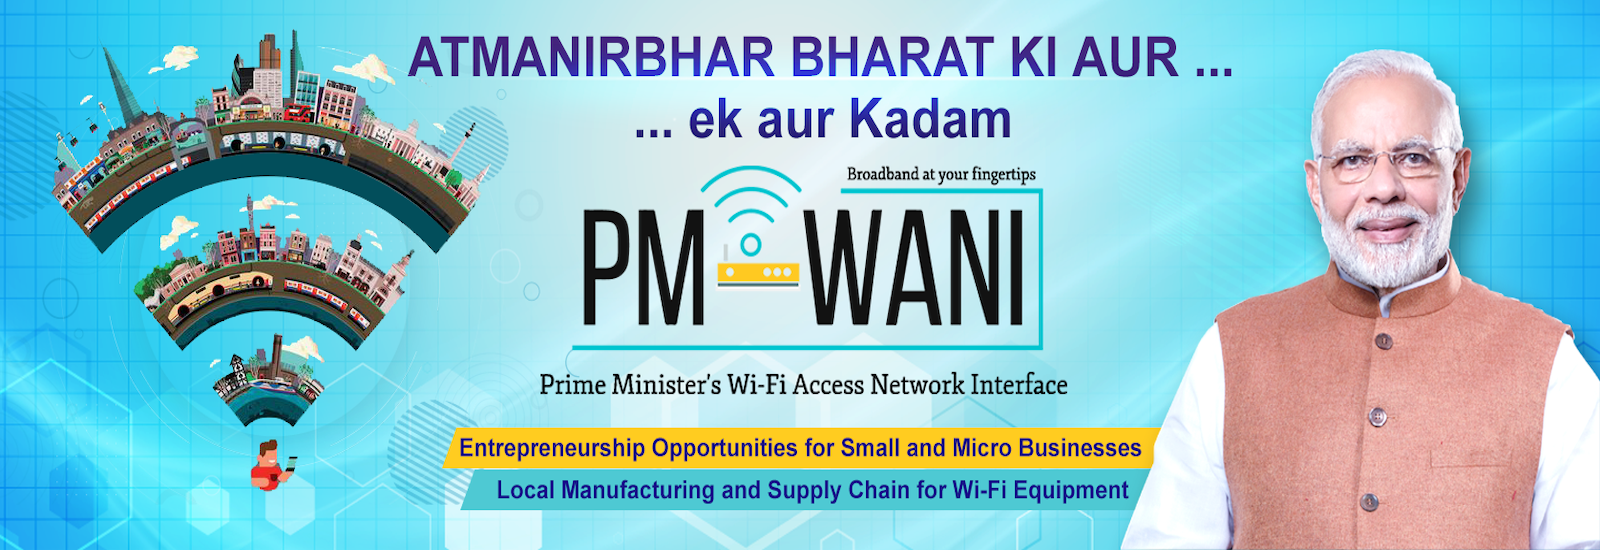 Prime Minister Wi-Fi Access Network Interface